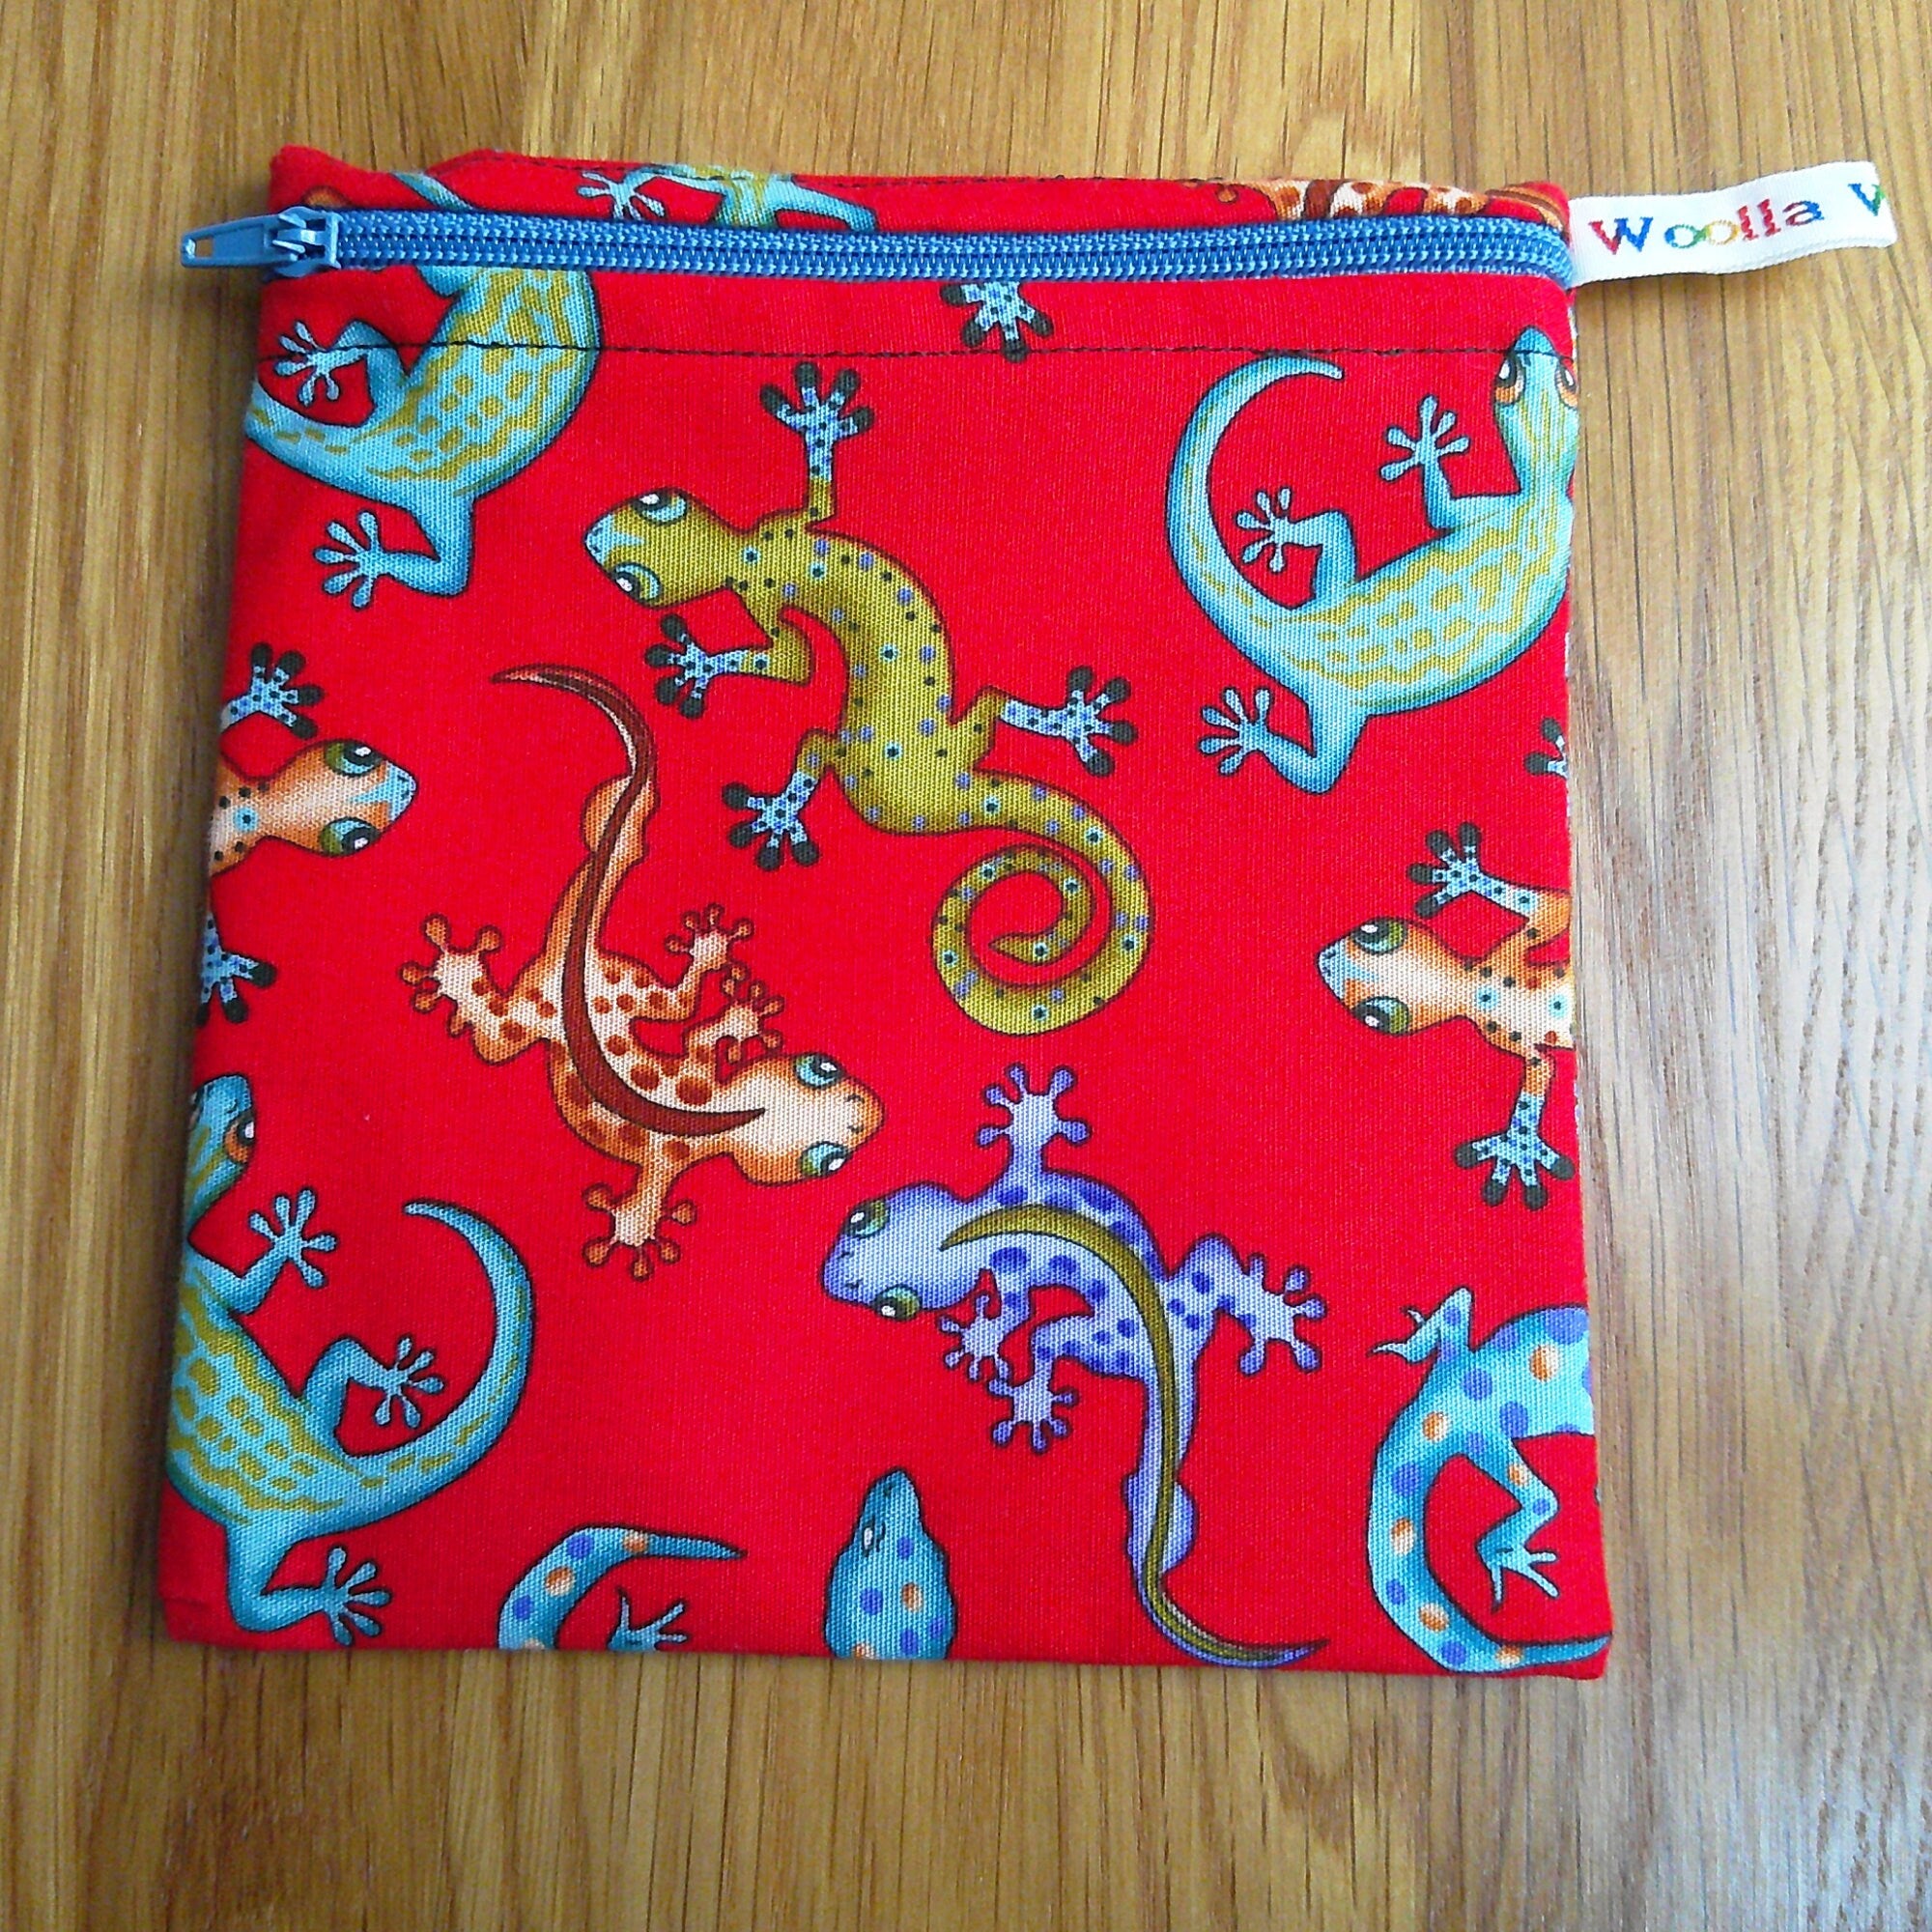 Reusable Snack Bag - Bikini Bag - Lunch Bag - Make Up Bag Small Poppins Waterproof Lined Zip Pouch - Sandwich - Period - Red Gecko